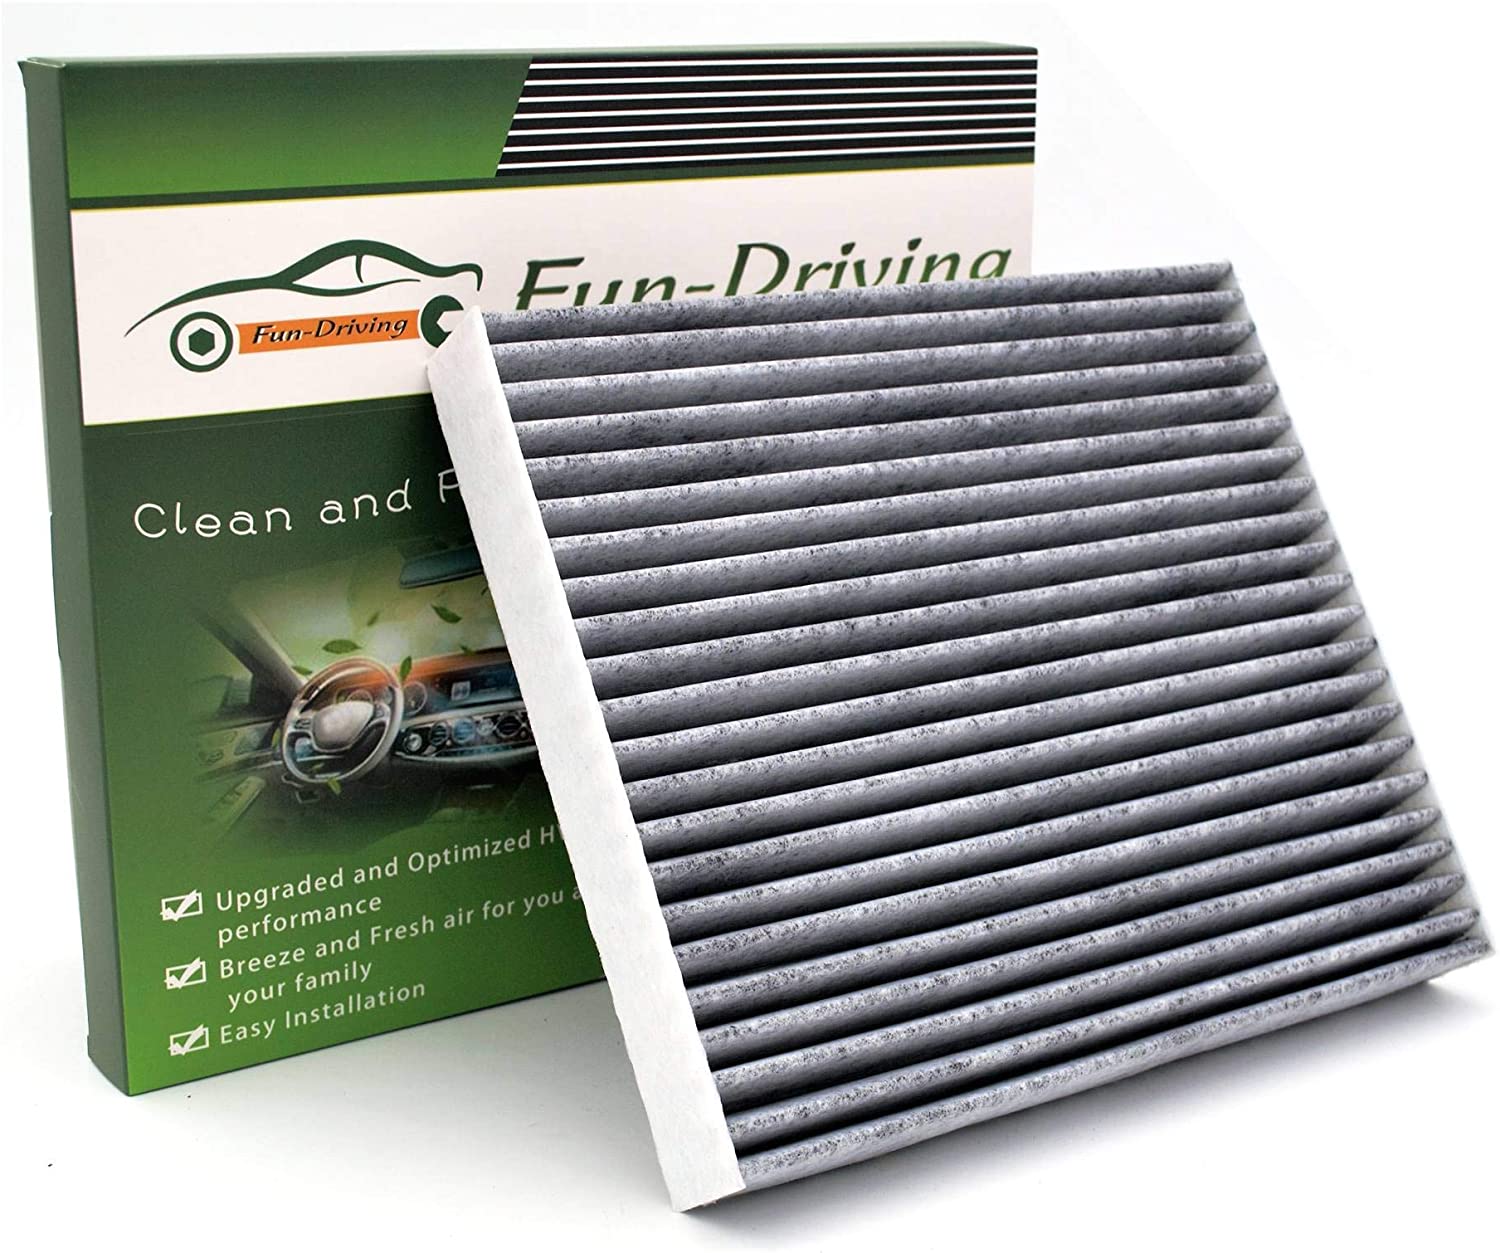 Cabin air filter for Toyota Corolla (2002~2008),Matrix (2003-2008),Replace CP133,CF10133 (Activated Carbon,1 Pack)